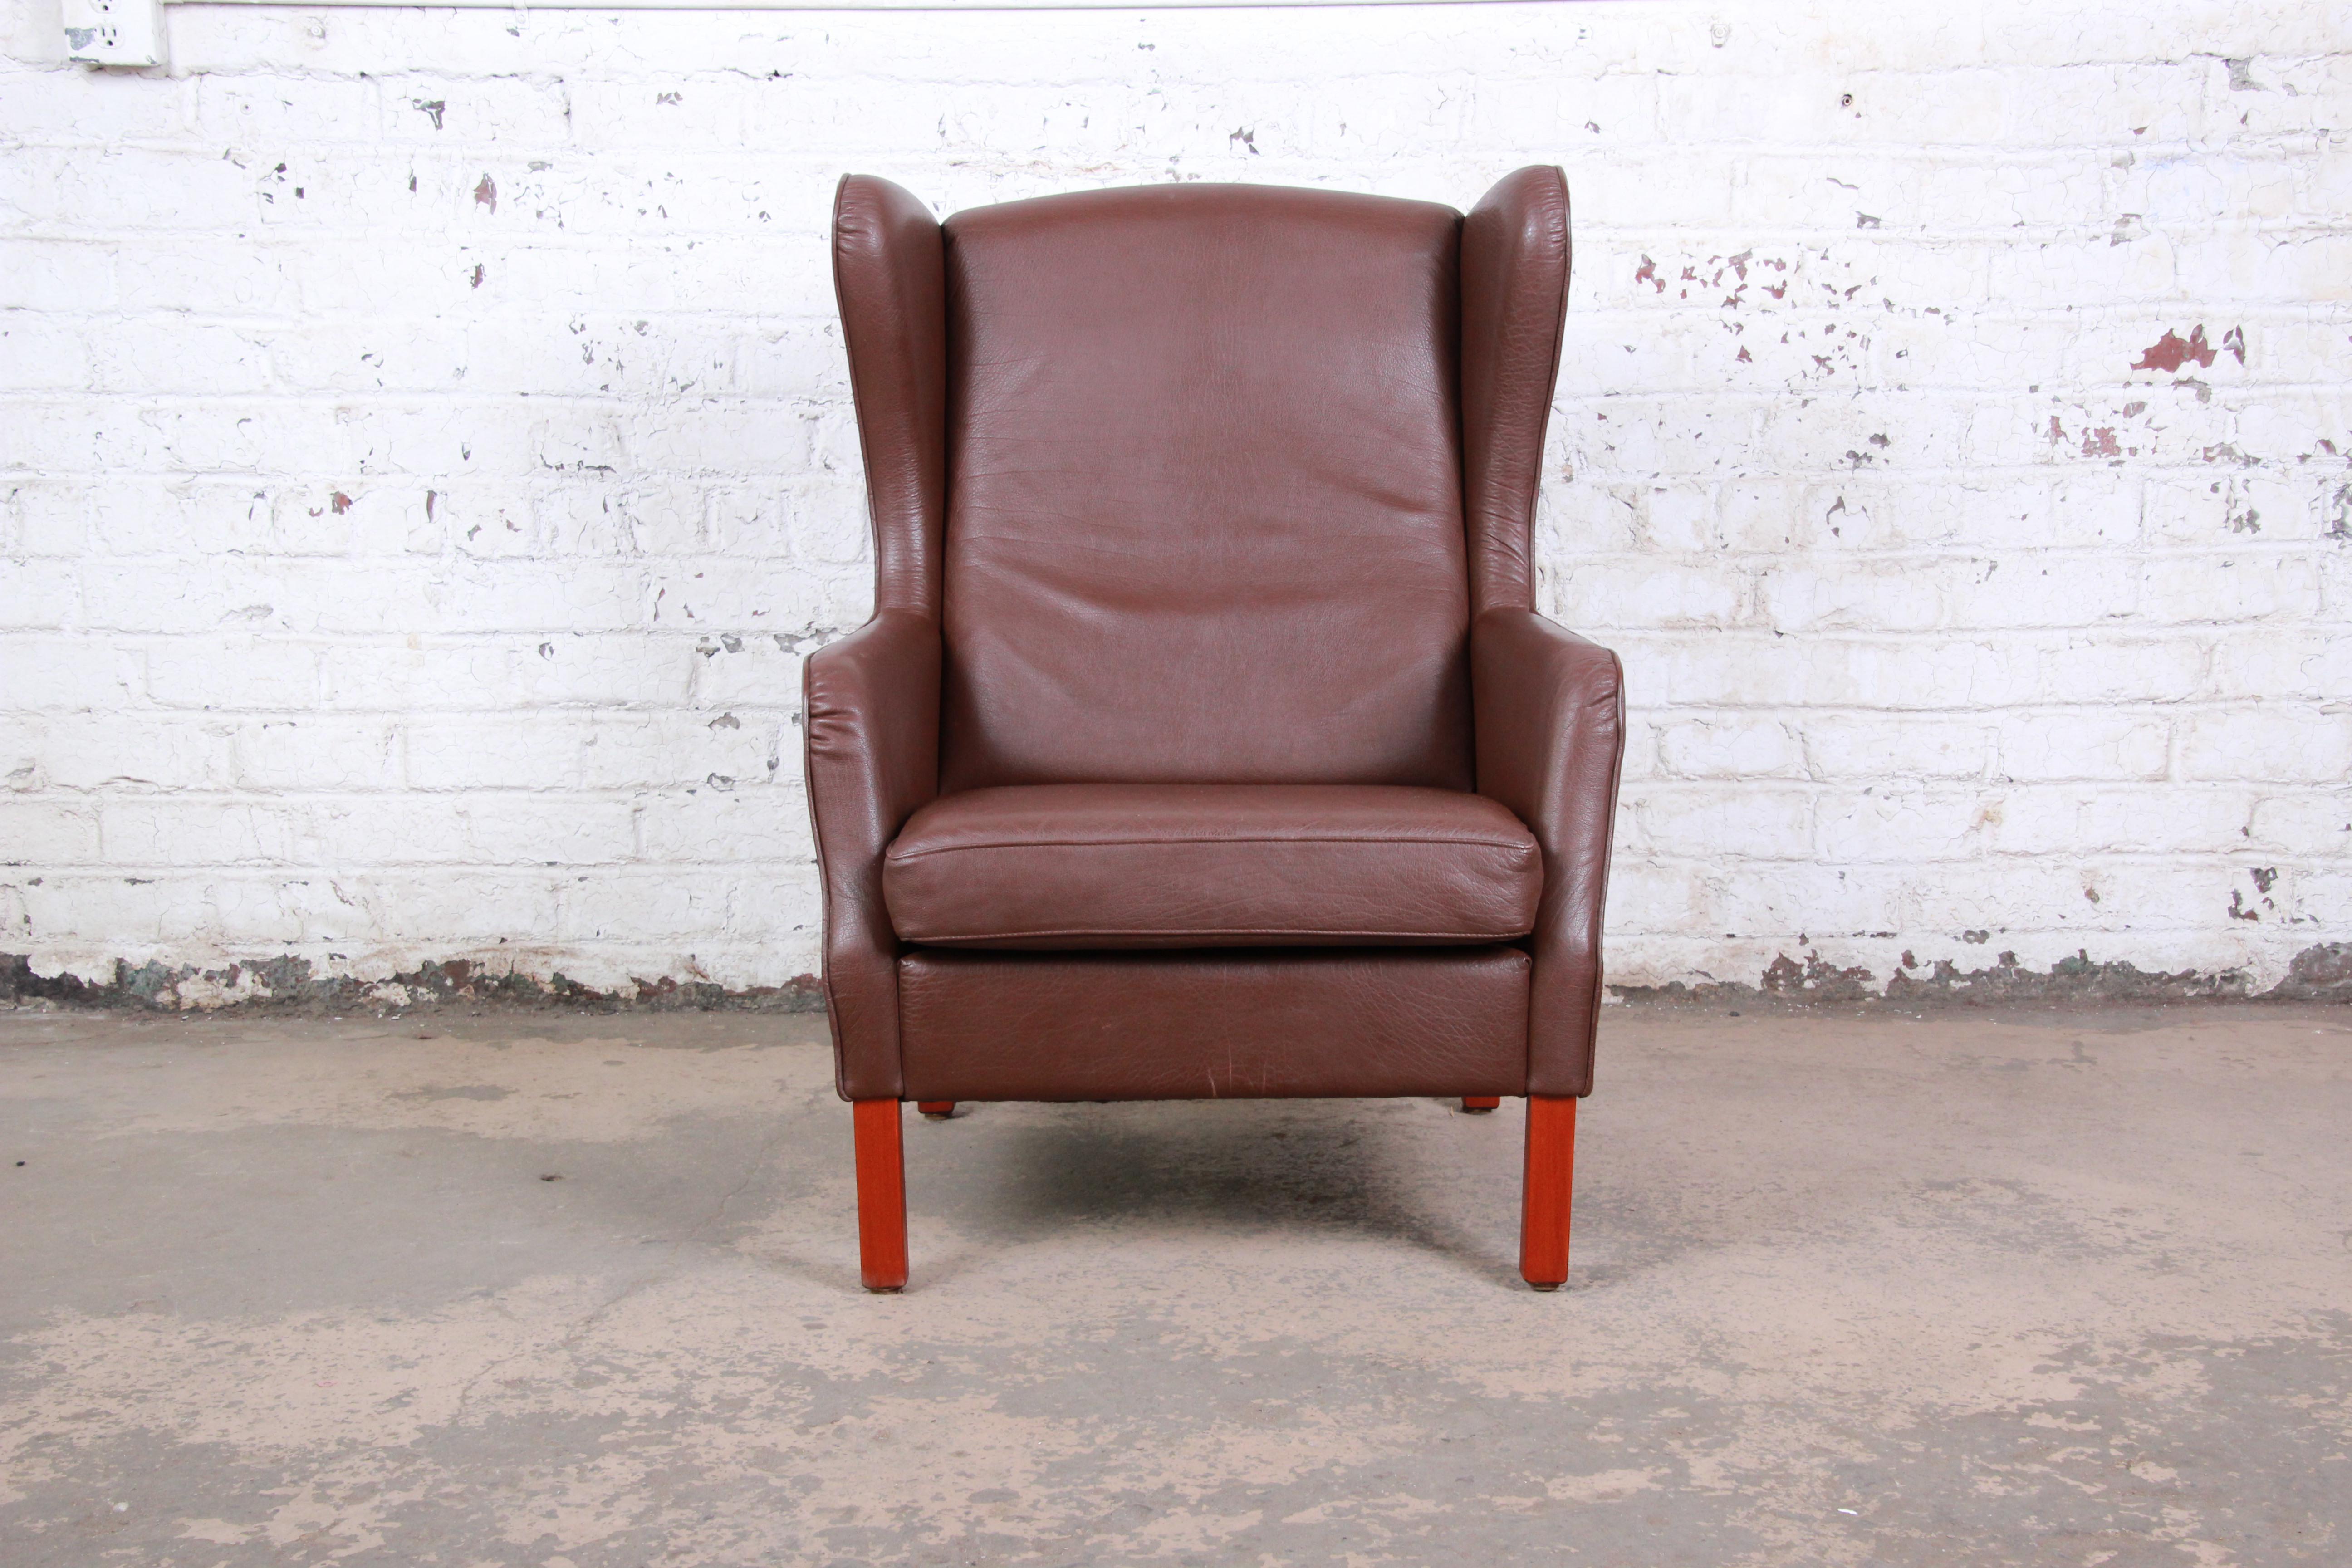 A gorgeous Danish modern brown leather wingback lounge chair in the style of Borge Mogensen. The chair is a wonderful blend of classic traditional and modern styles. It sits on squared mahogany legs. The chair is comfortable and overall in good